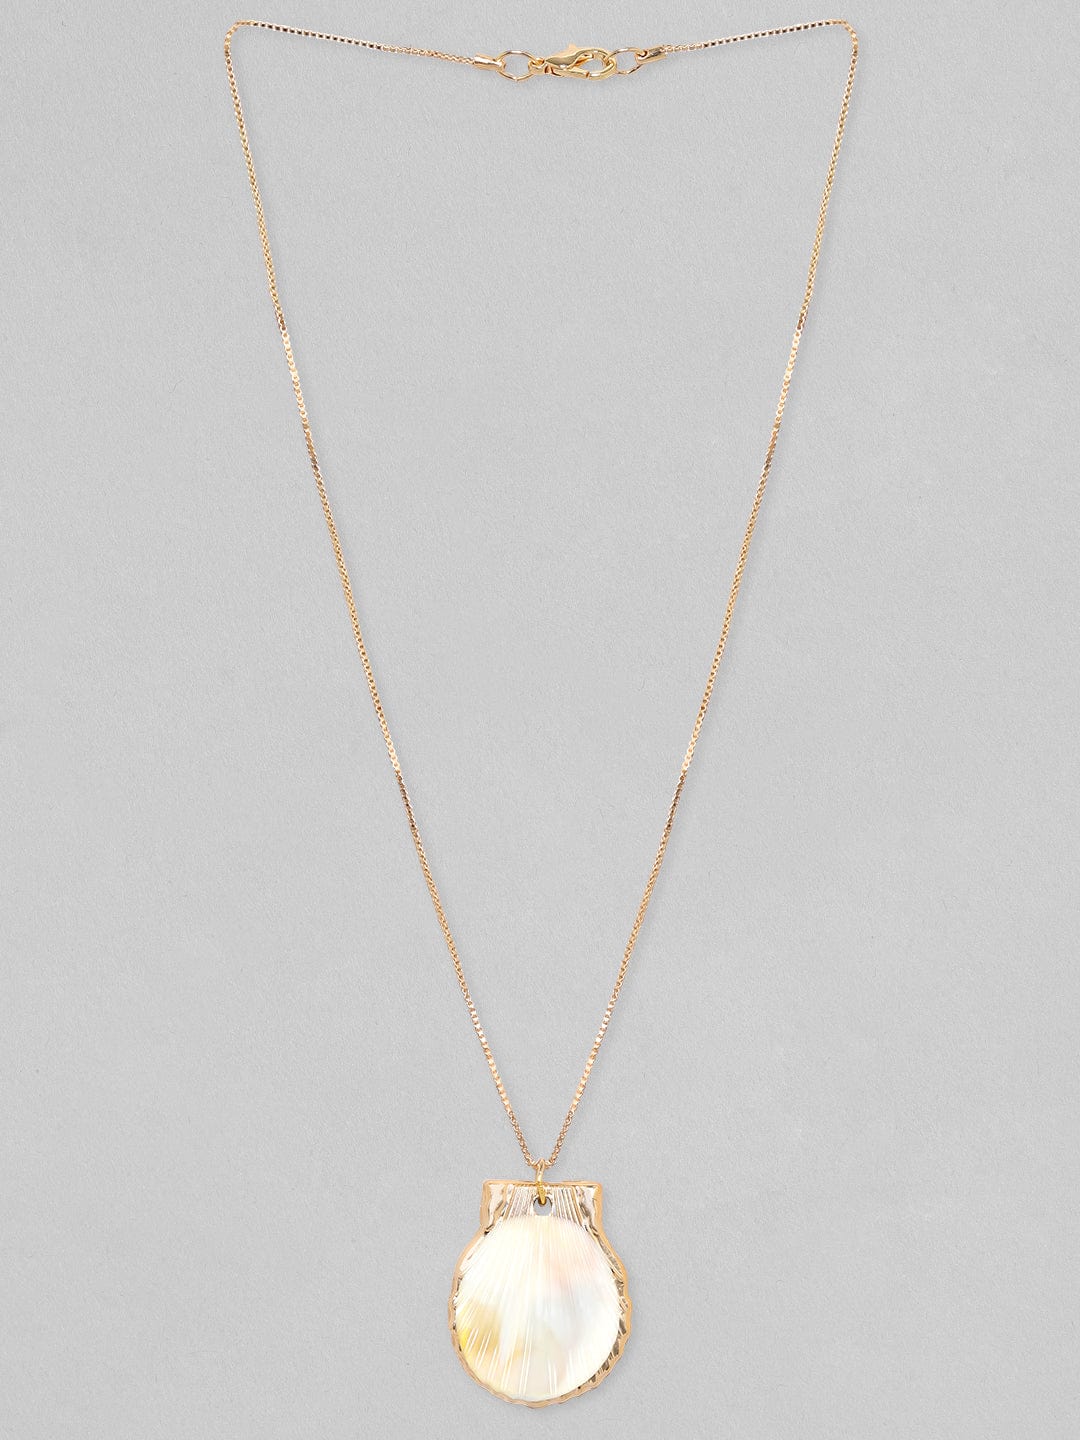 Rubans Voguish Gold-Plated Circular Shaped Pendant With Chain Chain & Necklaces